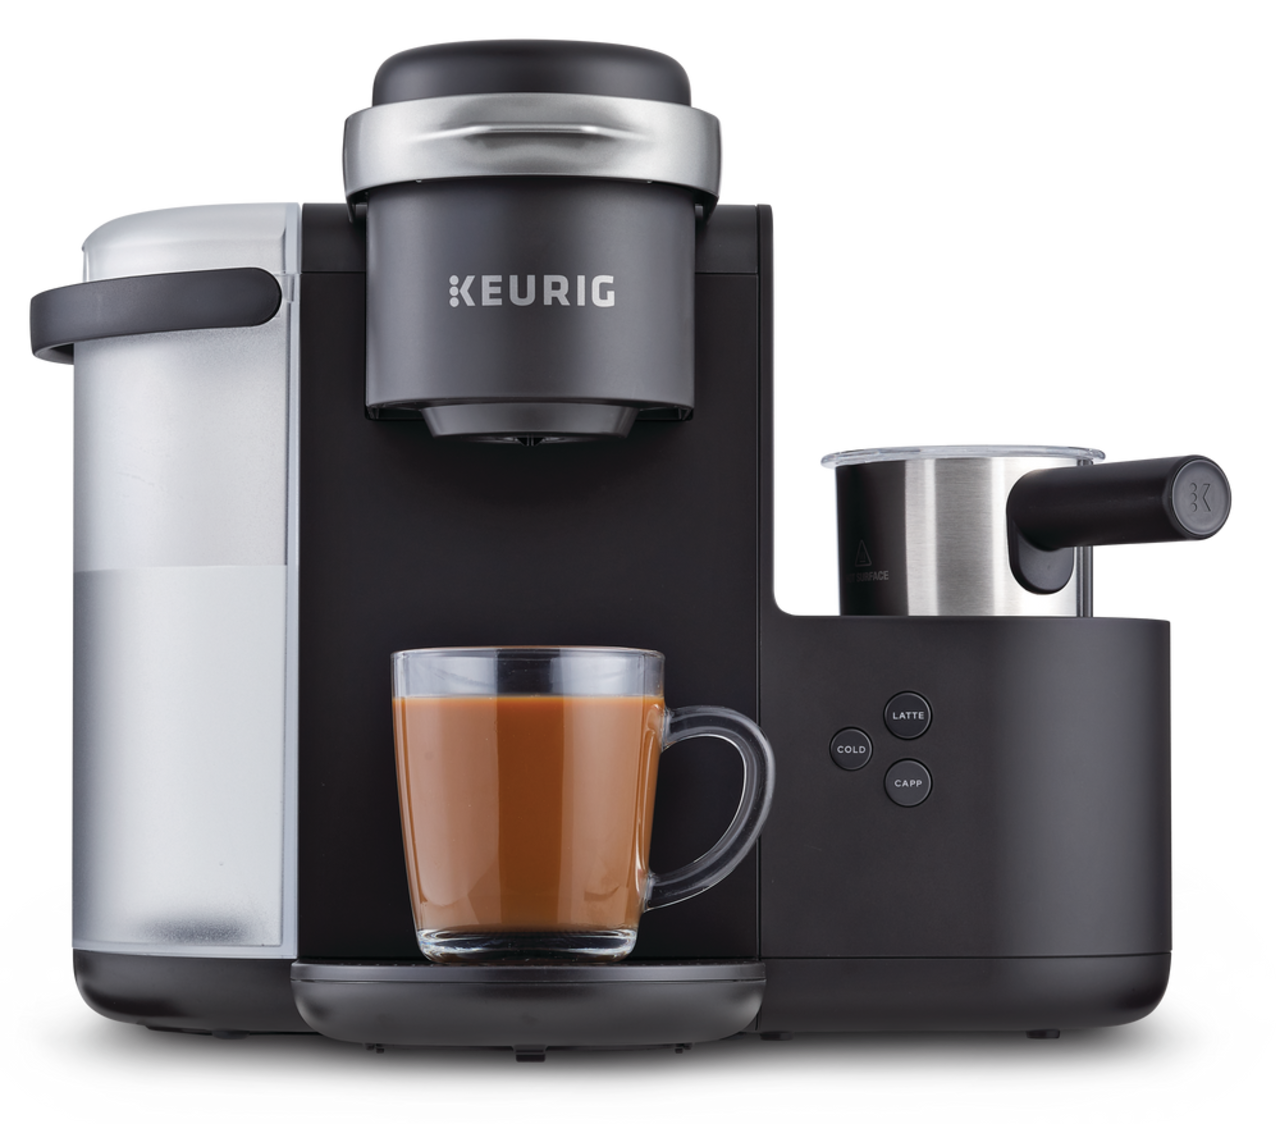 https://media-www.canadiantire.ca/product/living/kitchen/kitchen-appliances/0437327/keurig-k-cafe-def6a0bf-c33a-4028-a9d7-27e88eea43b1.png?imdensity=1&imwidth=640&impolicy=mZoom